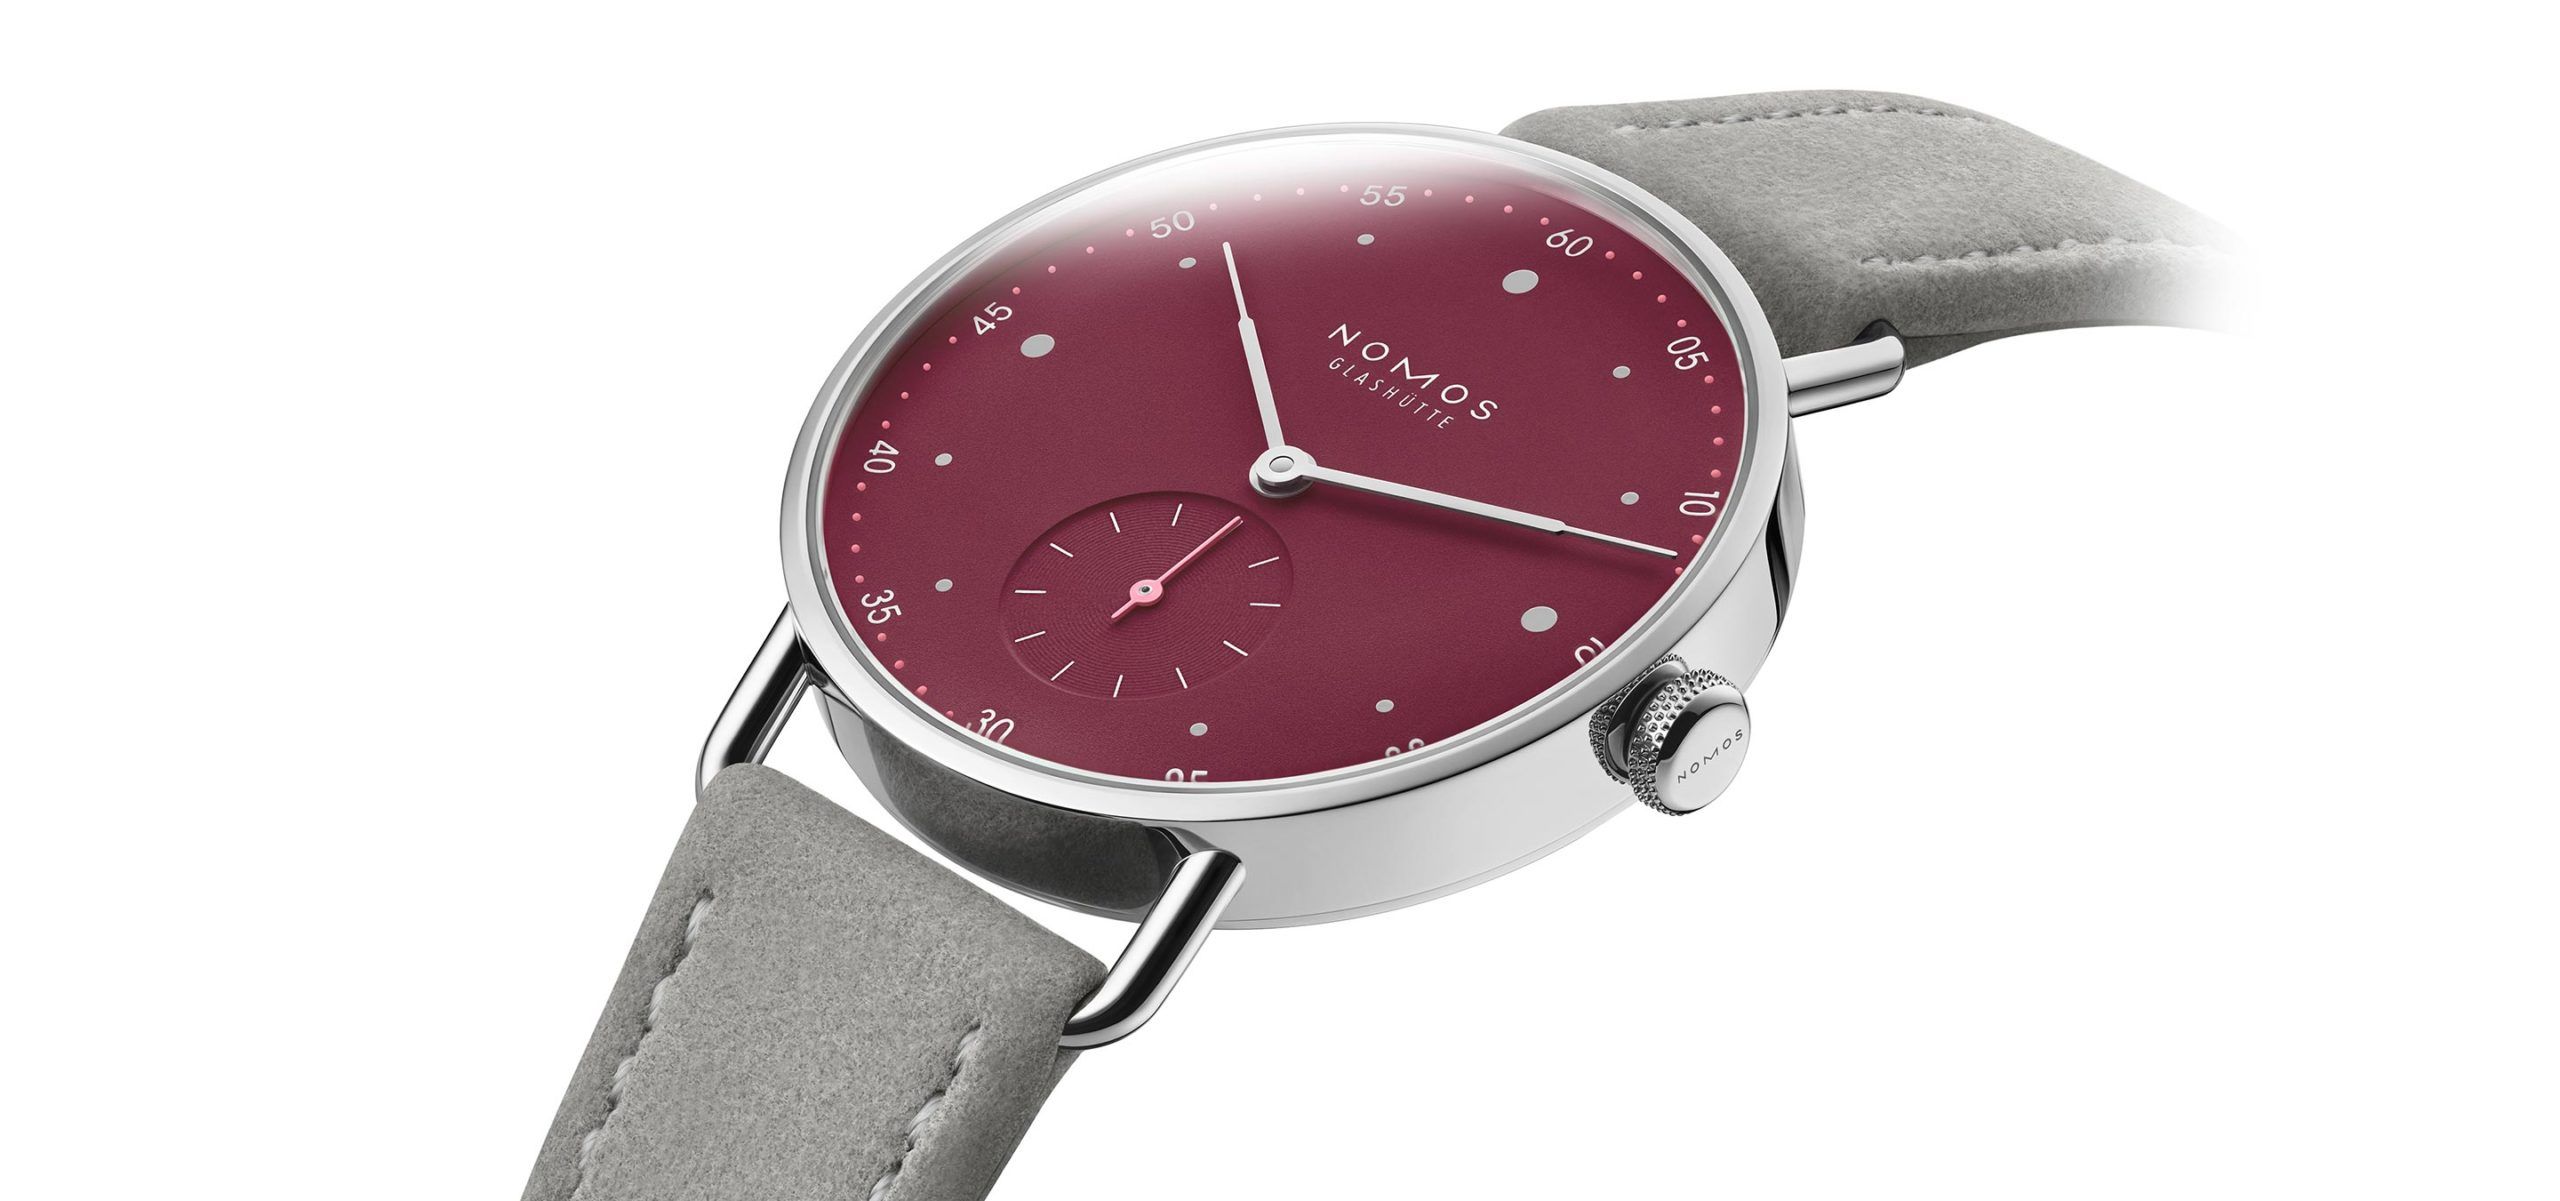 Good Things In Small Packages: Nomos Introduce New Colours In Their Metro 33 Collection